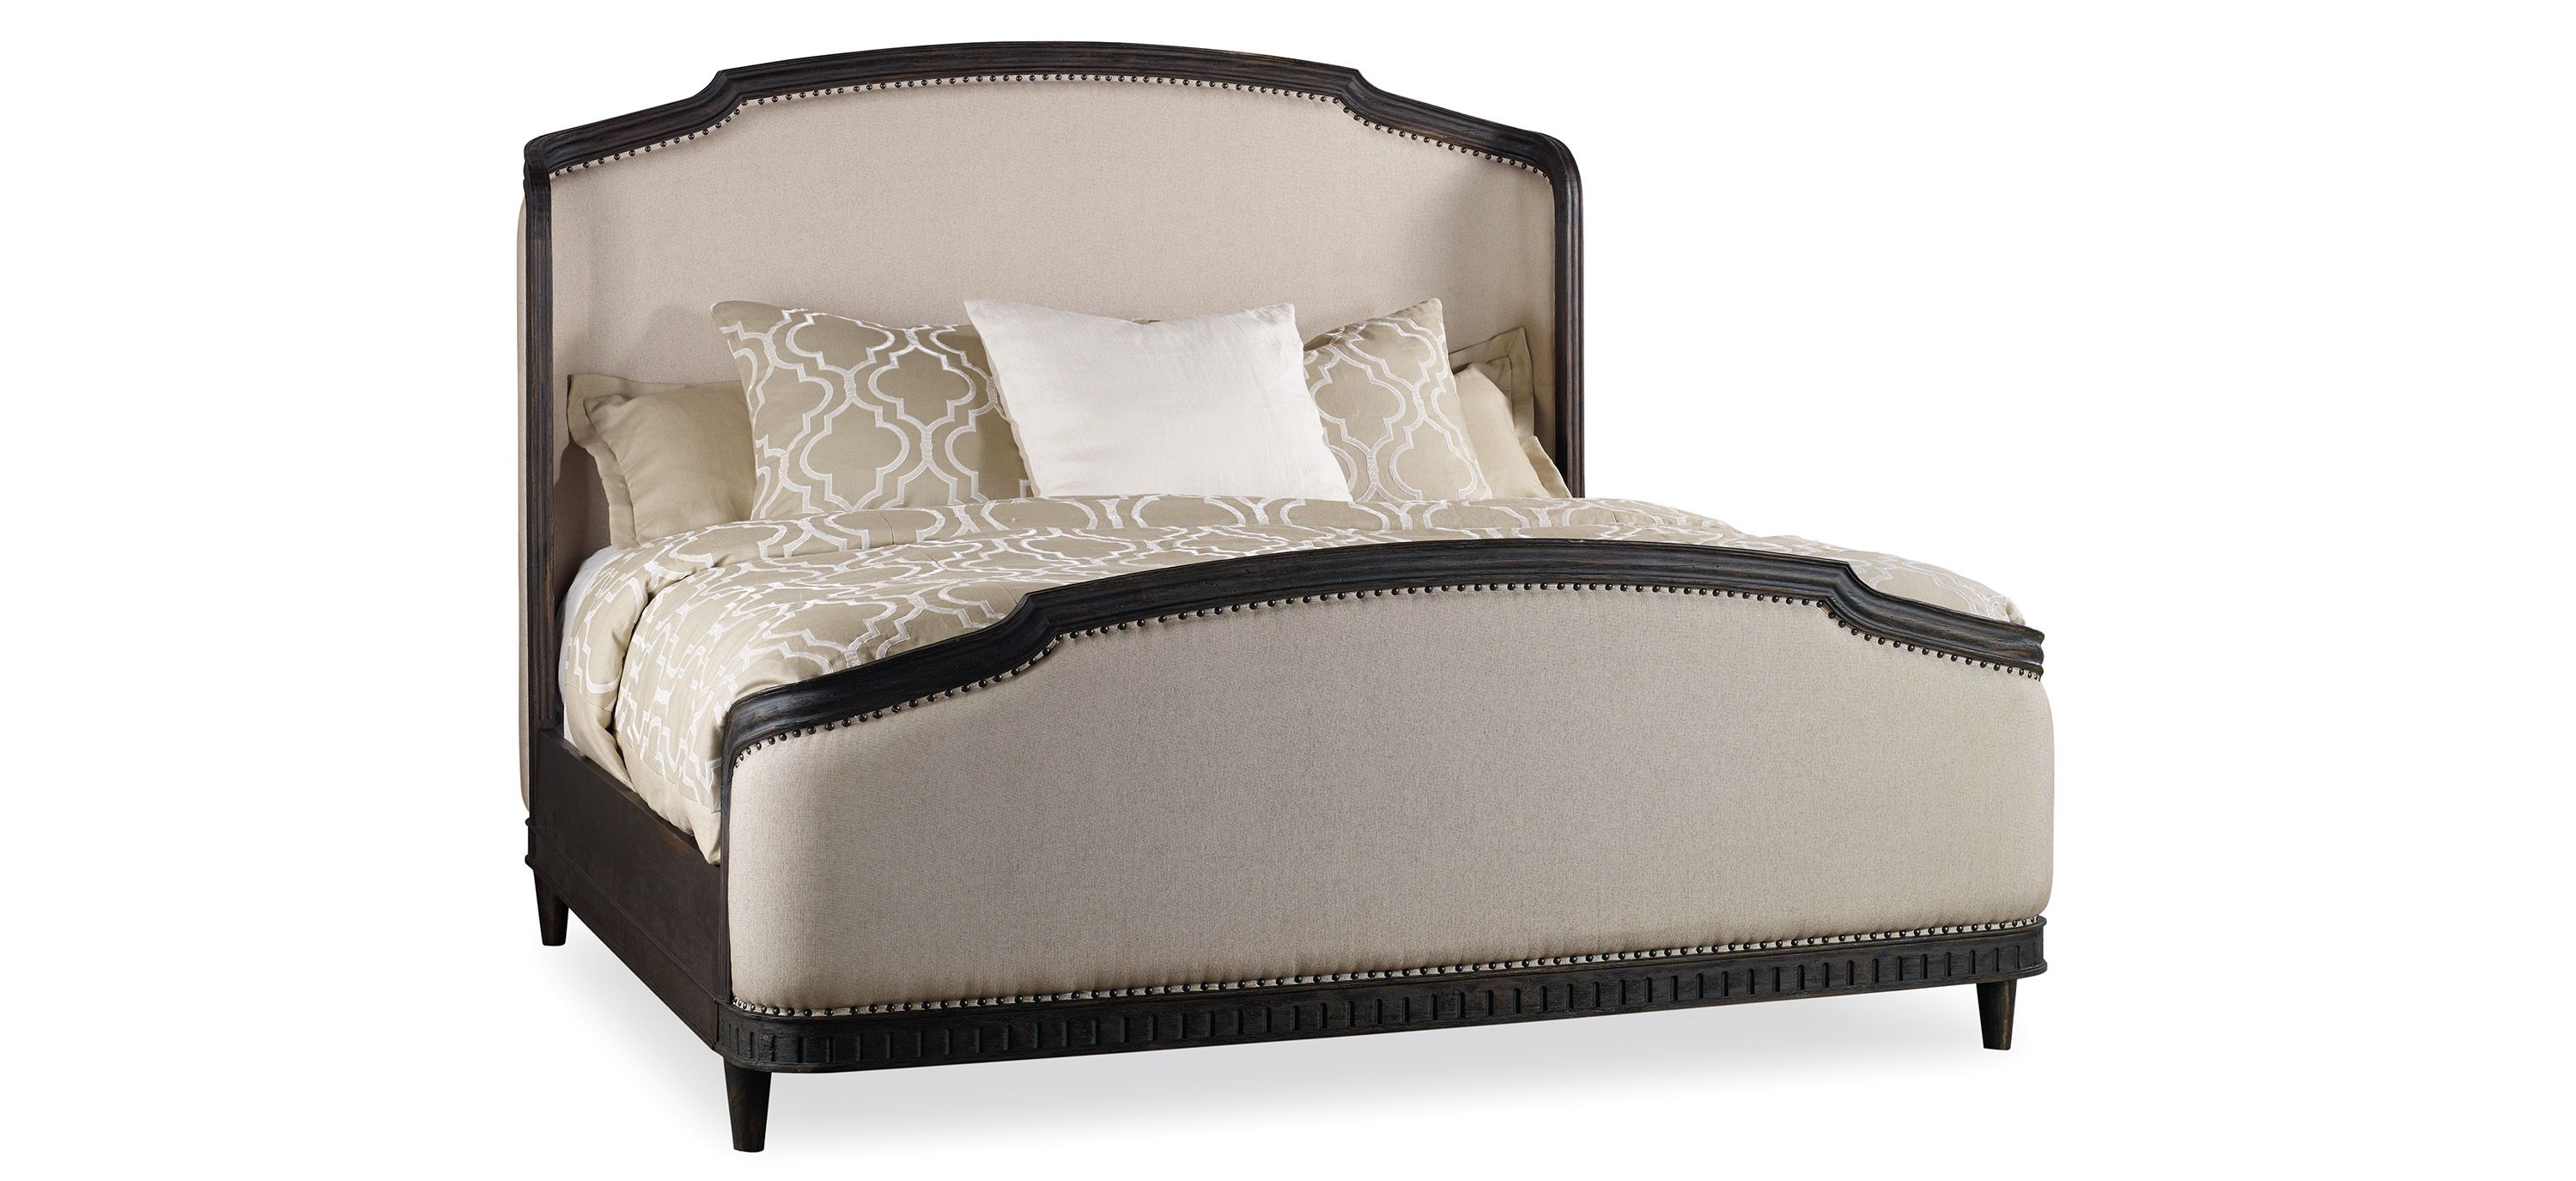 Corsica Upholstered Bed